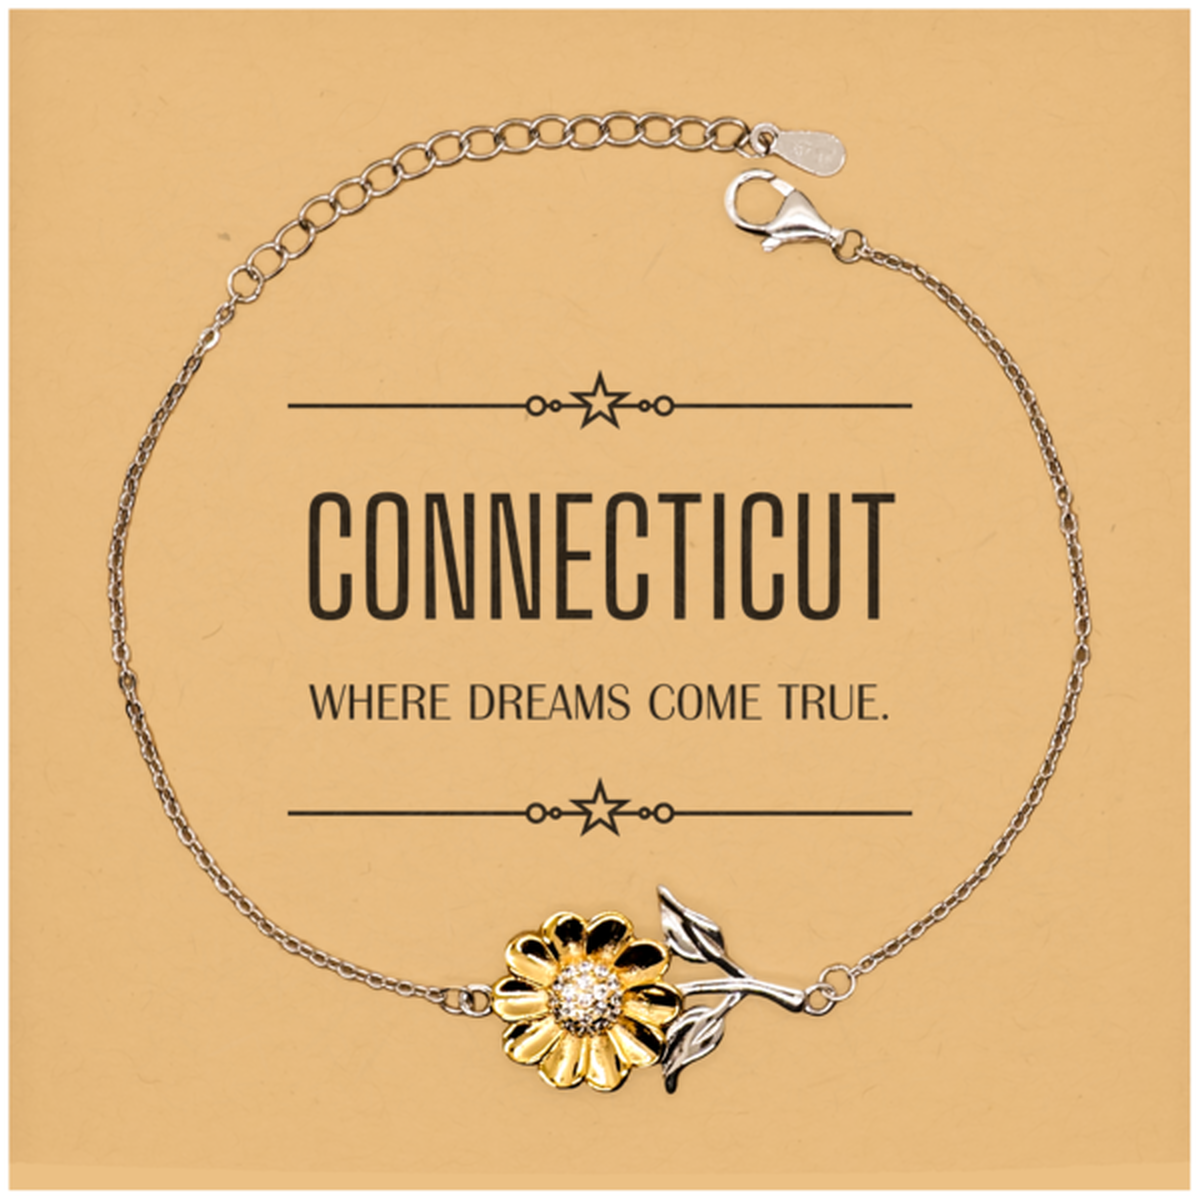 Love Connecticut State Sunflower Bracelet, Connecticut Where dreams come true, Birthday Christmas Inspirational Gifts For Connecticut Men, Women, Friends